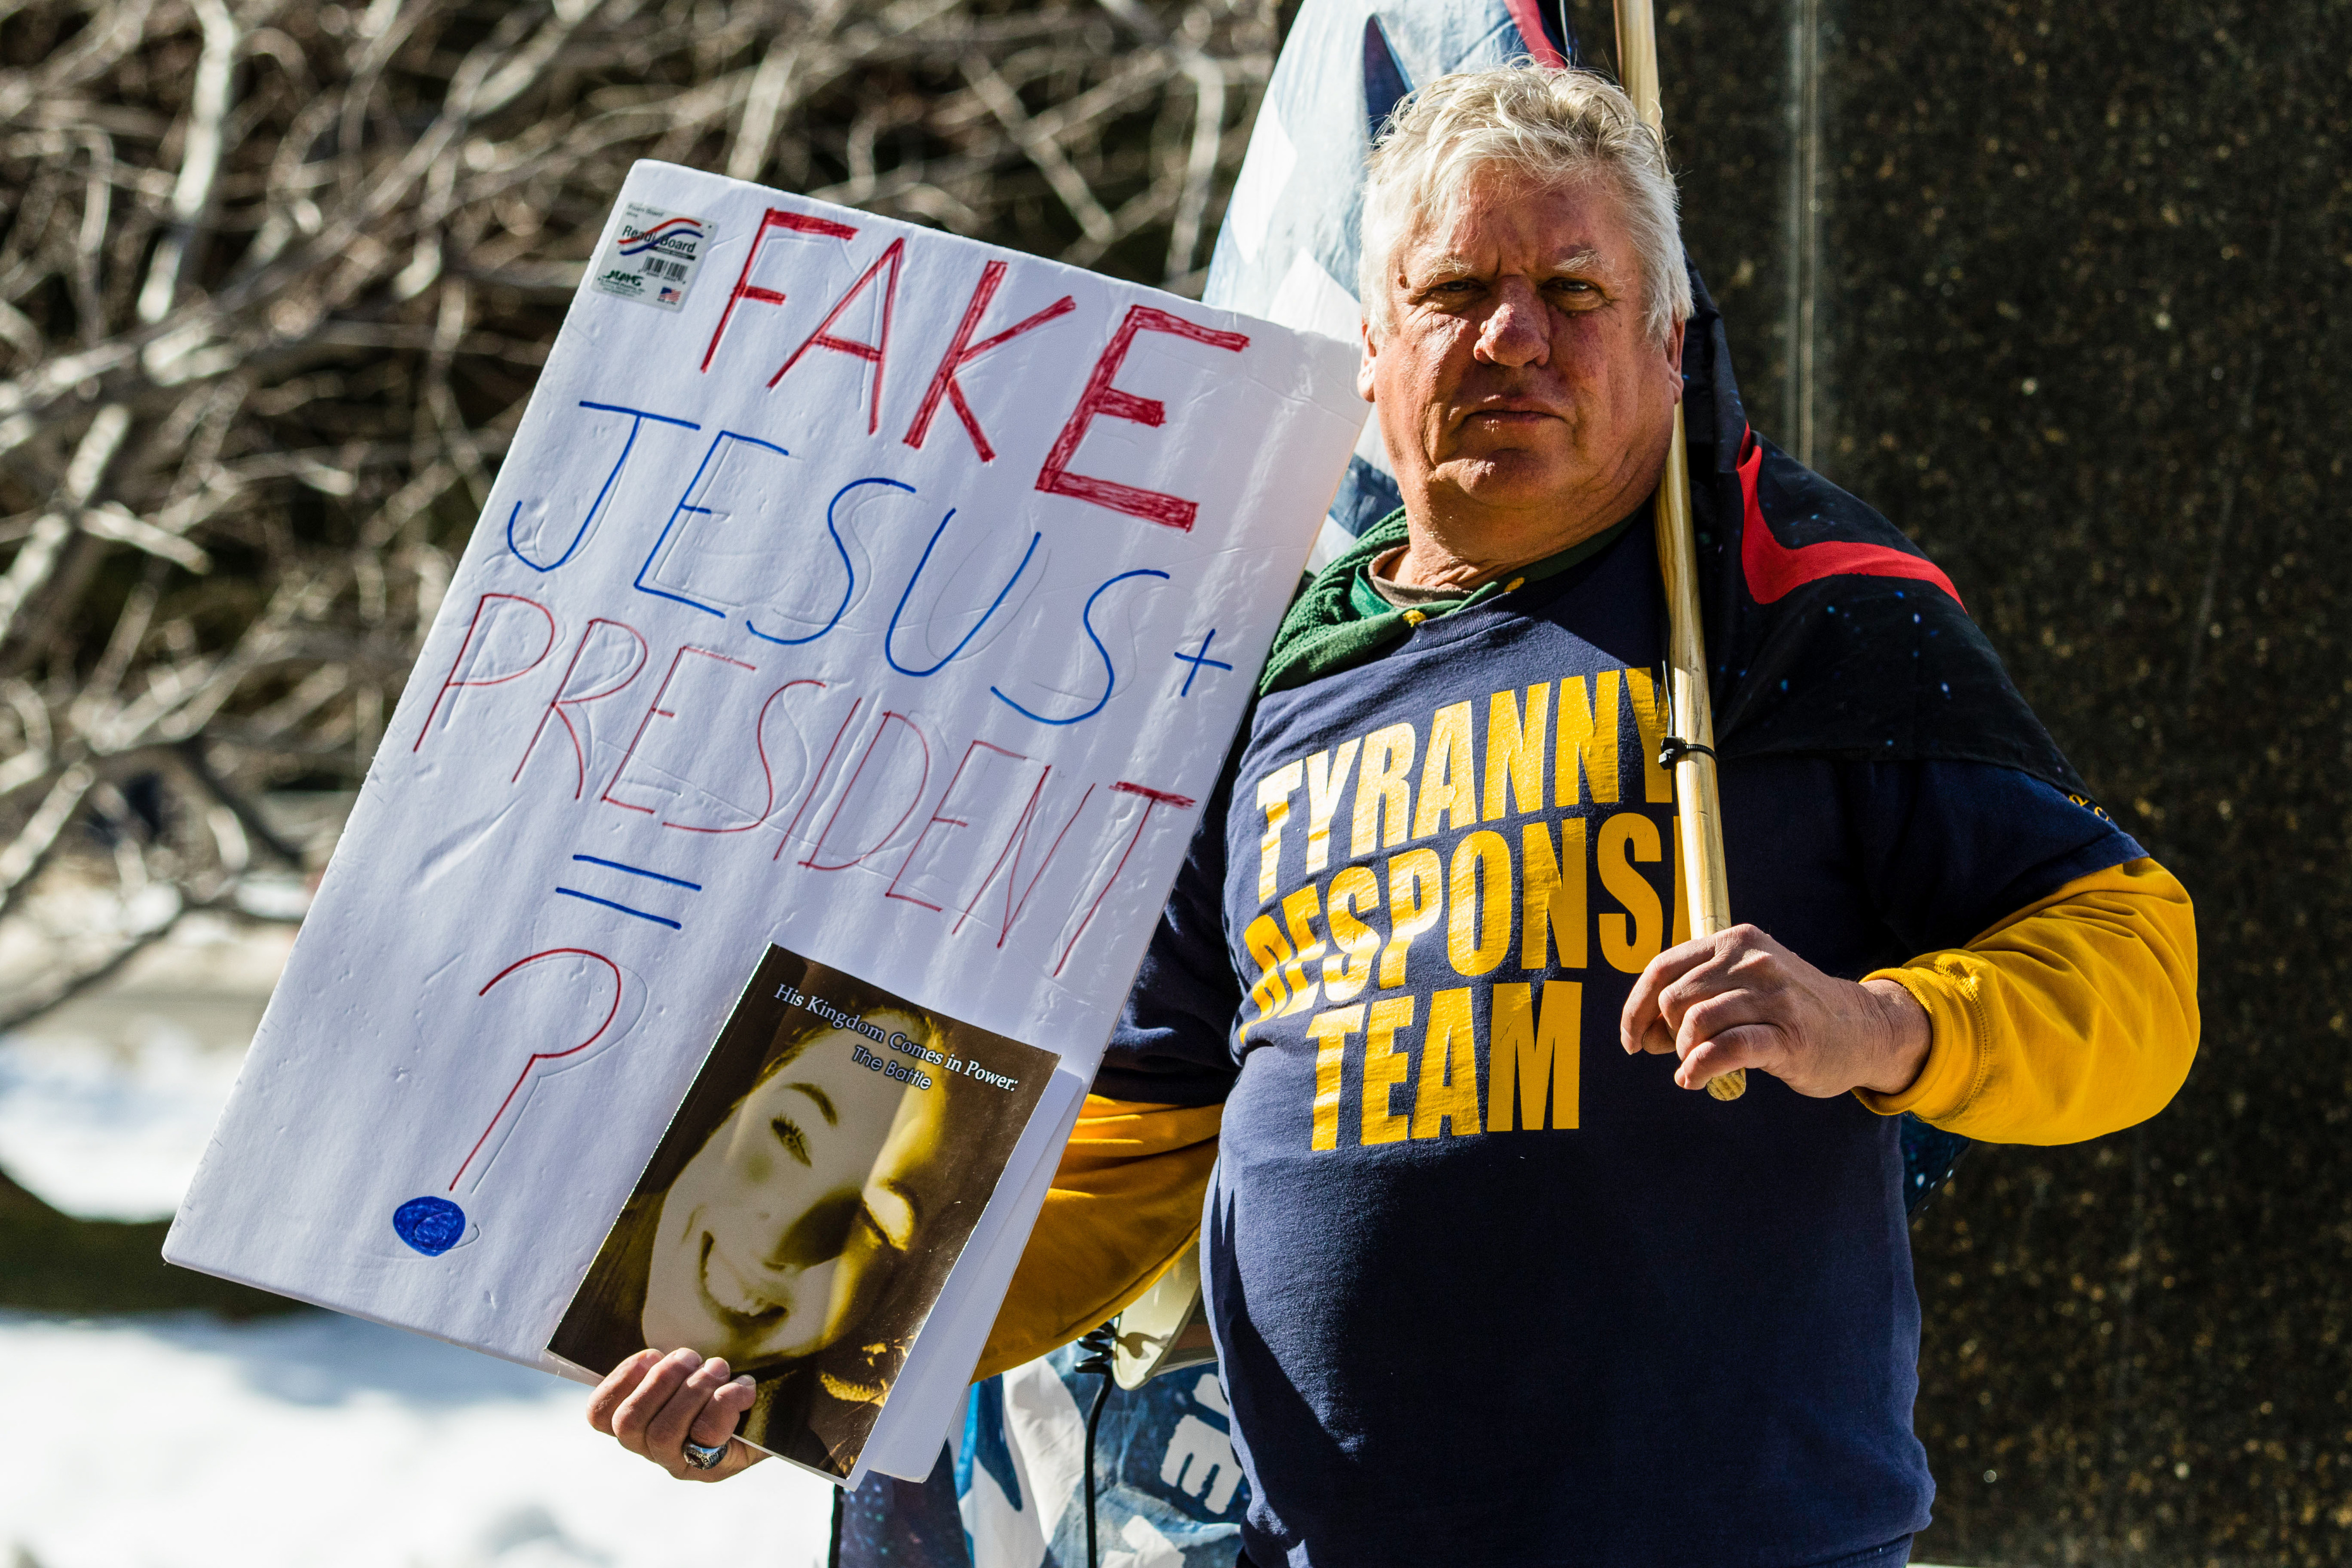 A person in a “Tyranny response team” T-shirt holds a handmade sign that reads “Fake Jesus plus president equals ?”